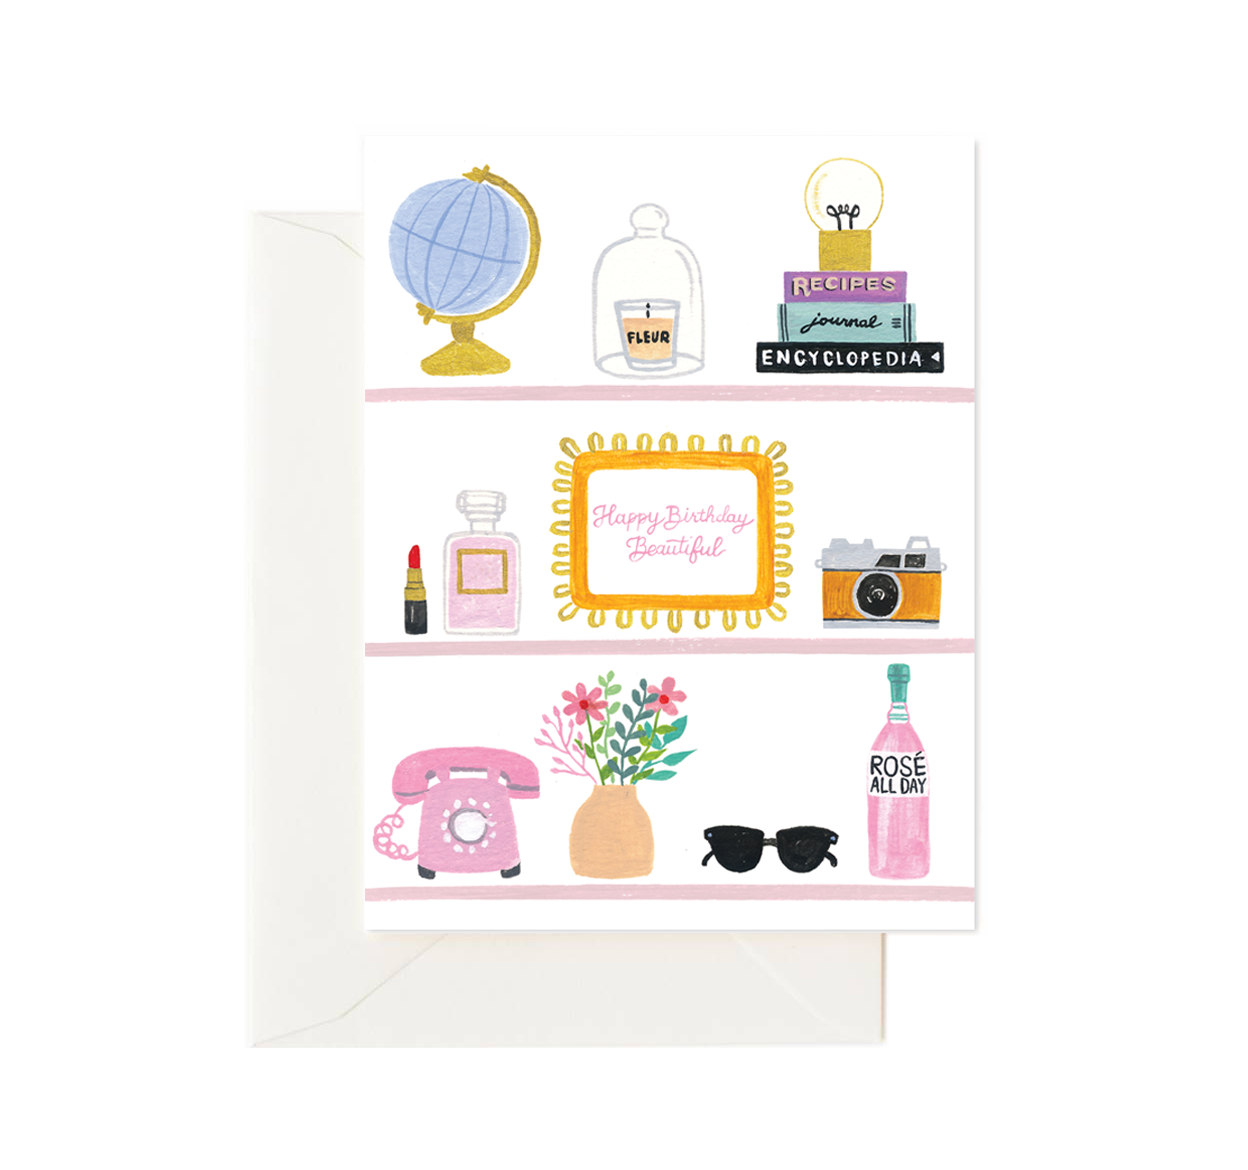  Beauty Shelfie by Forage Paper Co. Forage Paper Co. Perfumarie